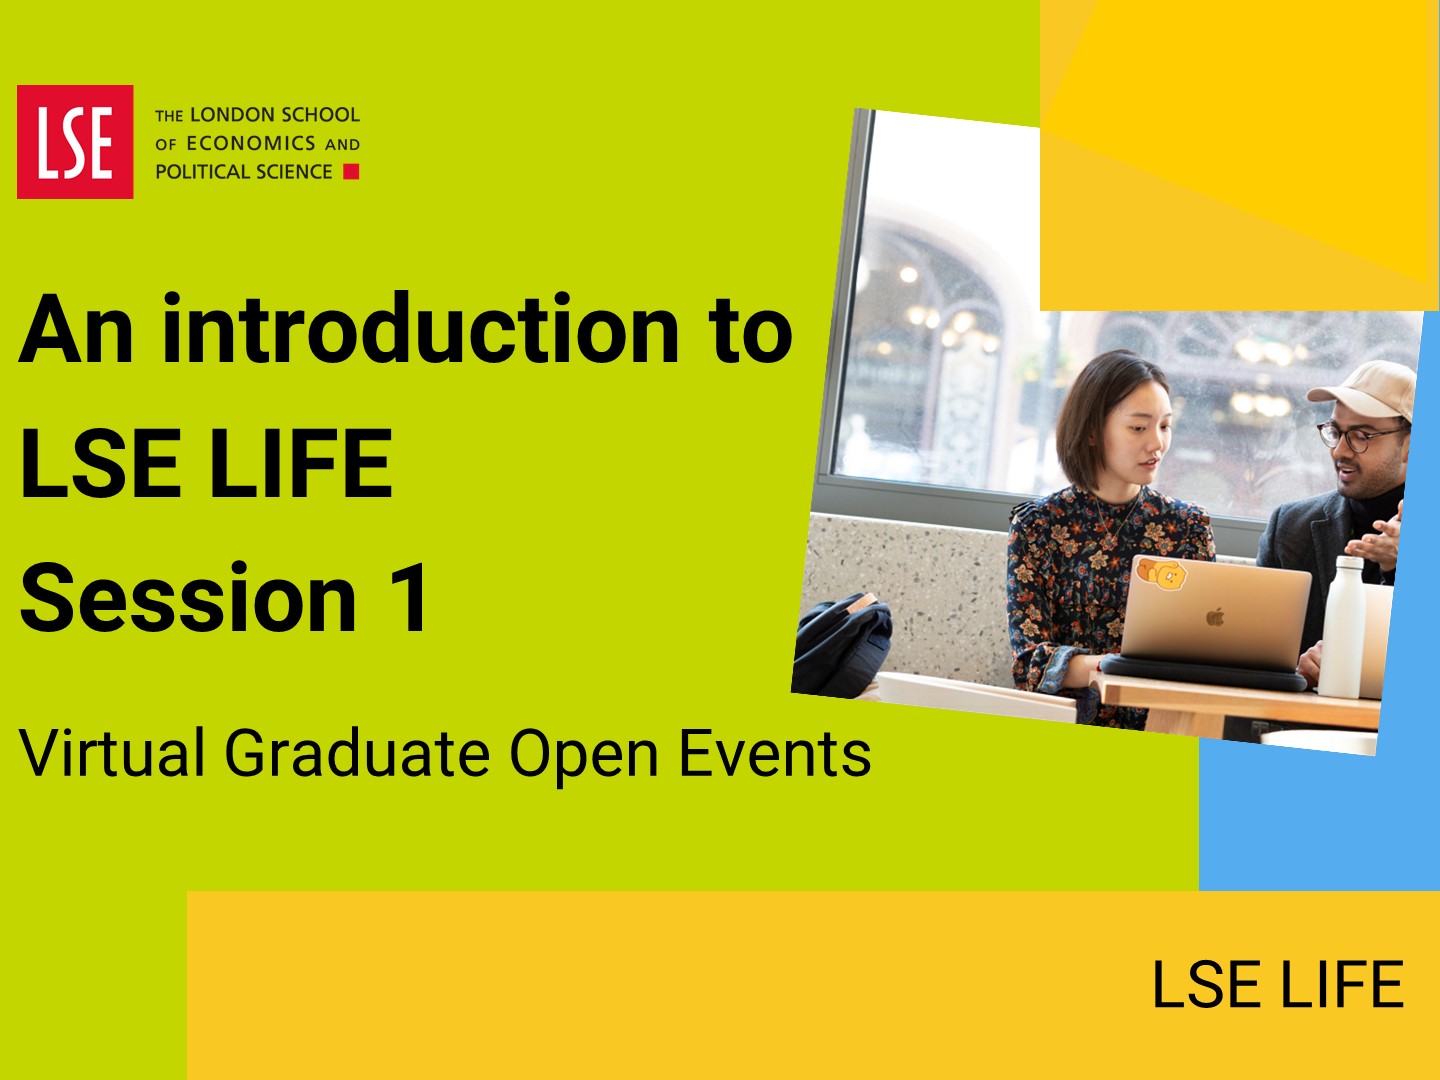 An Introduction to LSE LIFE (session 1)